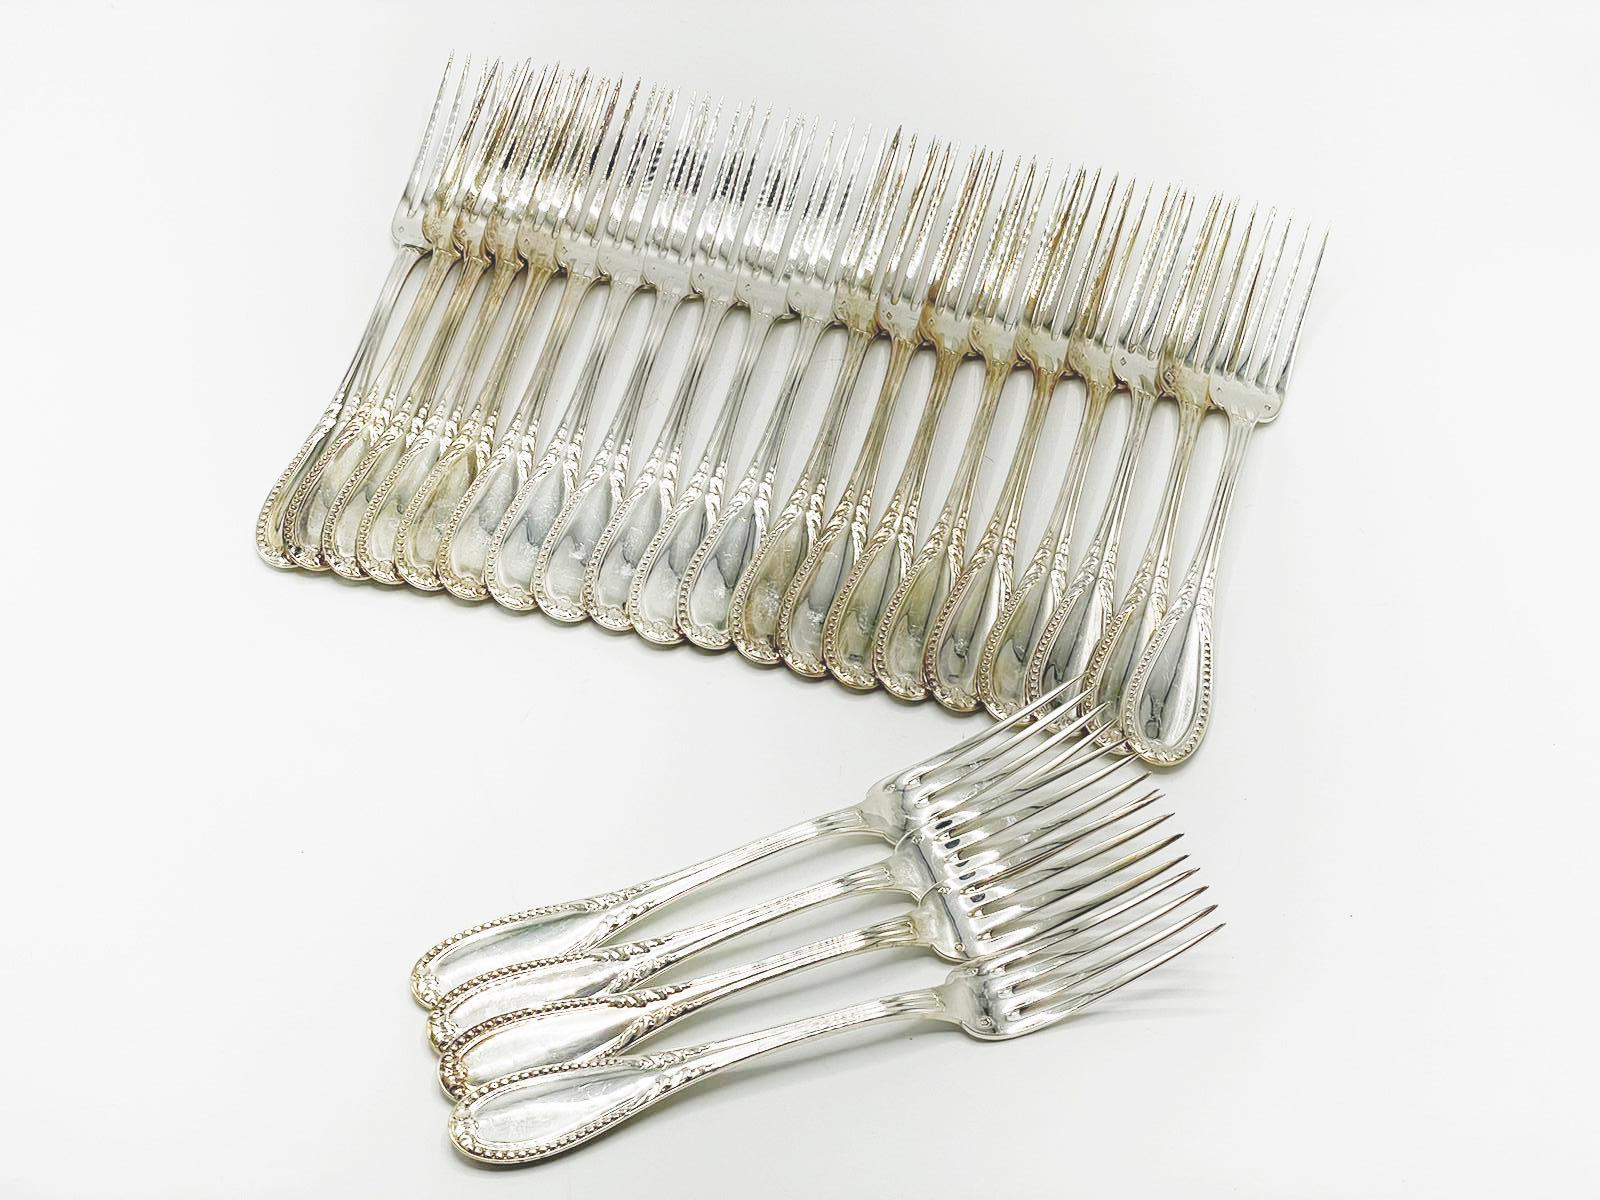 Antique French sterling silver cutlery set by Alphonse Debaine, Art Deco 20th Ce
This Beautiful set include:

148 pieces in total. 
Description:

24 dinner forks - 21.5 centimeters
12 salad forks - 17.5 centimeters
24 dinner knives - 24.5